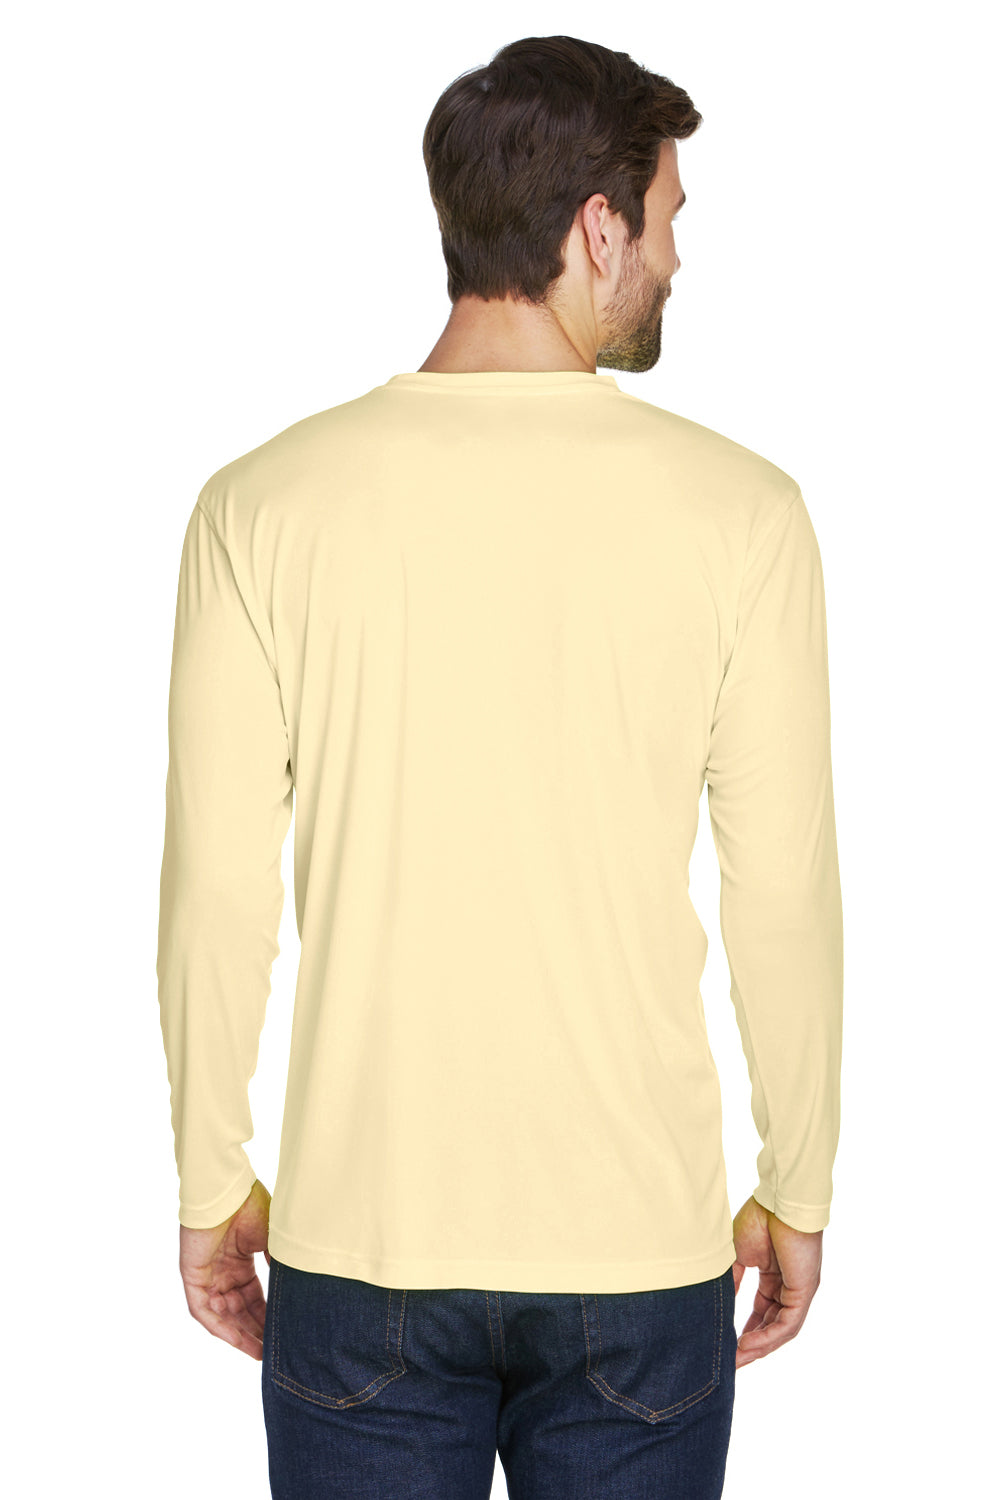 UltraClub 8422 Mens Cool & Dry Performance Moisture Wicking Long Sleeve Crewneck T-Shirt Butter Yellow Back